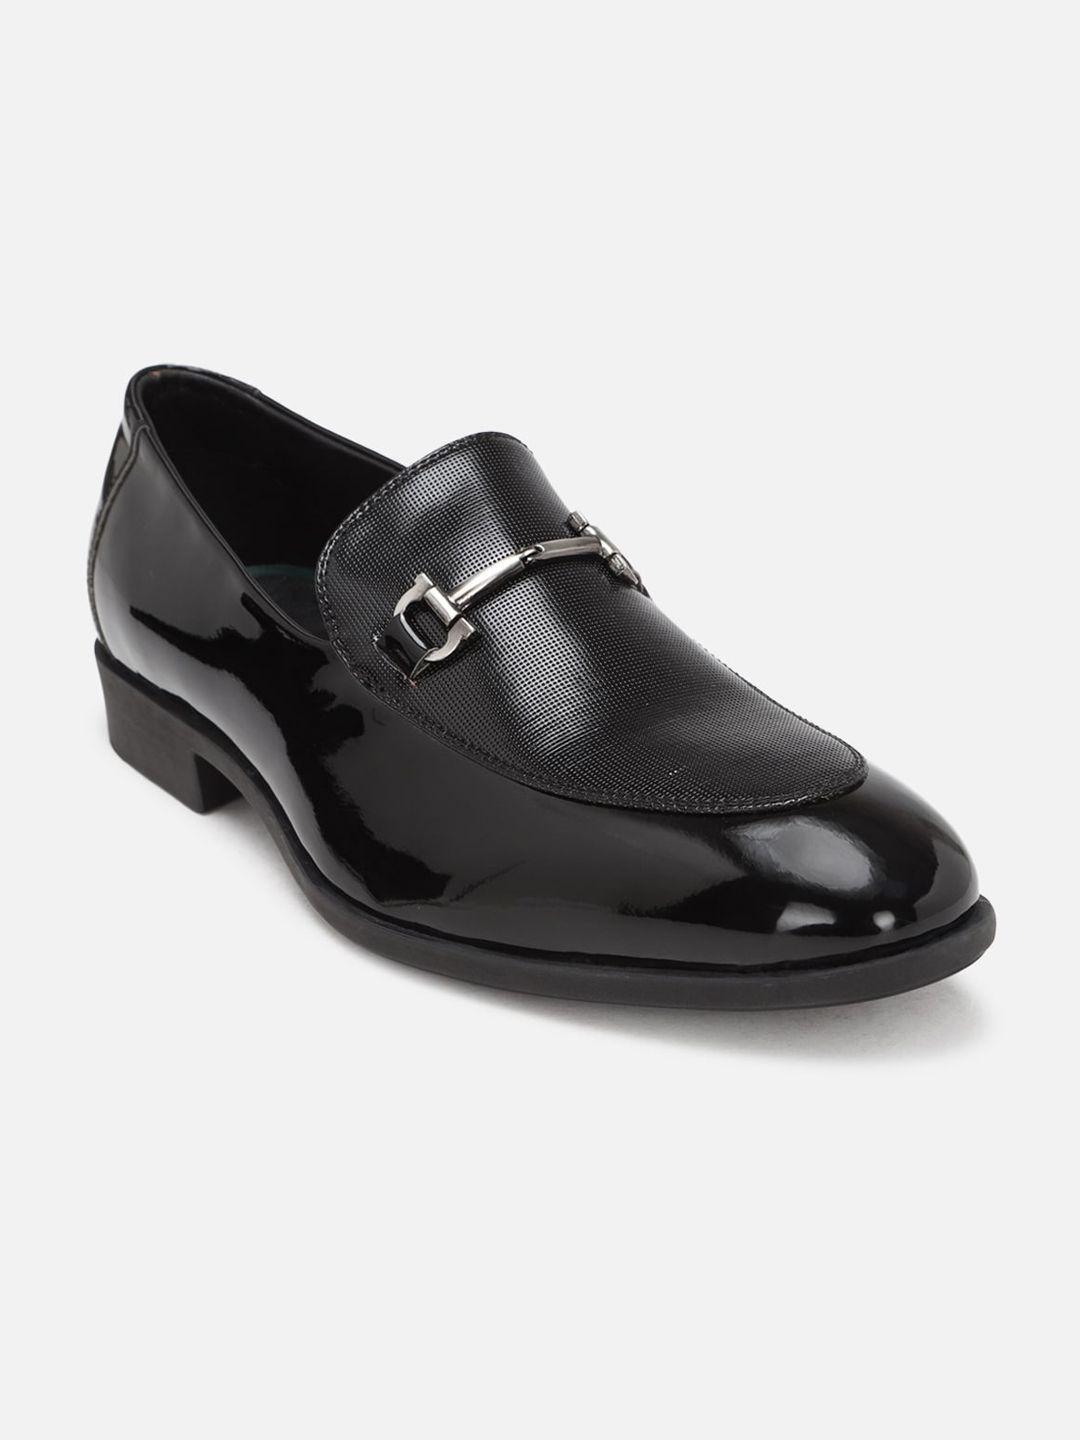 peter england men textured leather formal slip-on shoes